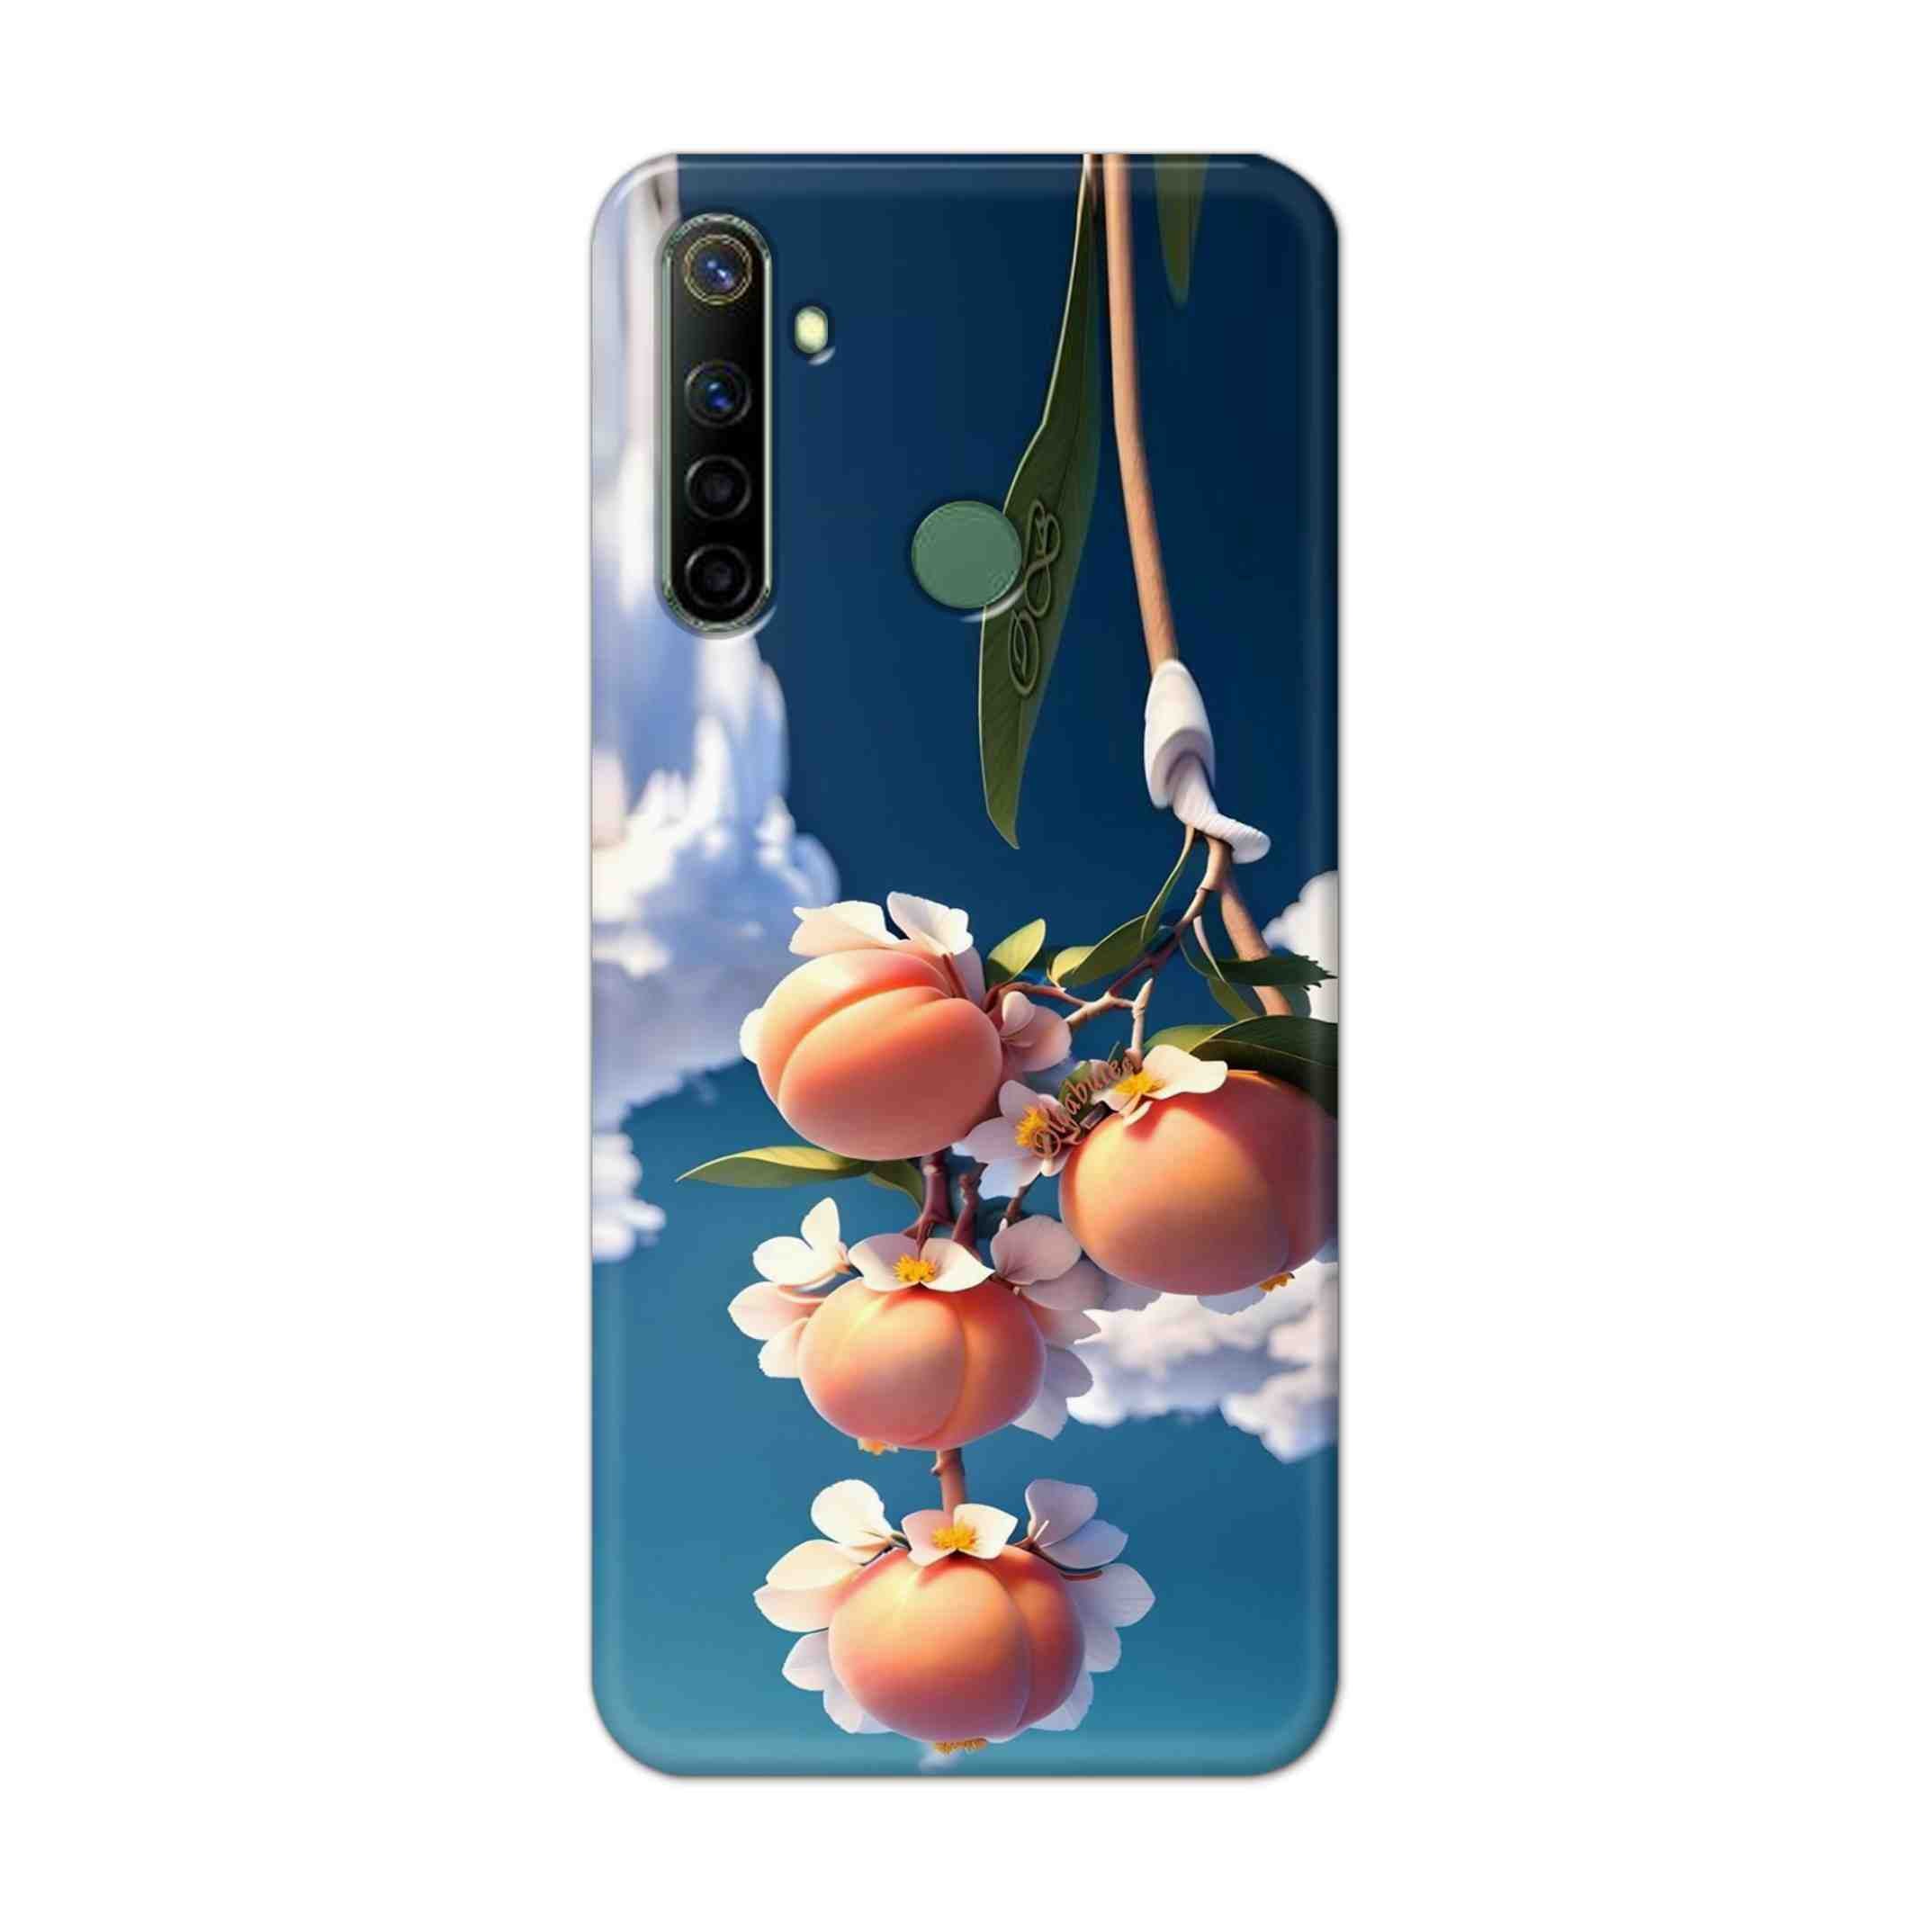 Buy Fruit Hard Back Mobile Phone Case Cover For Realme Narzo 10a Online